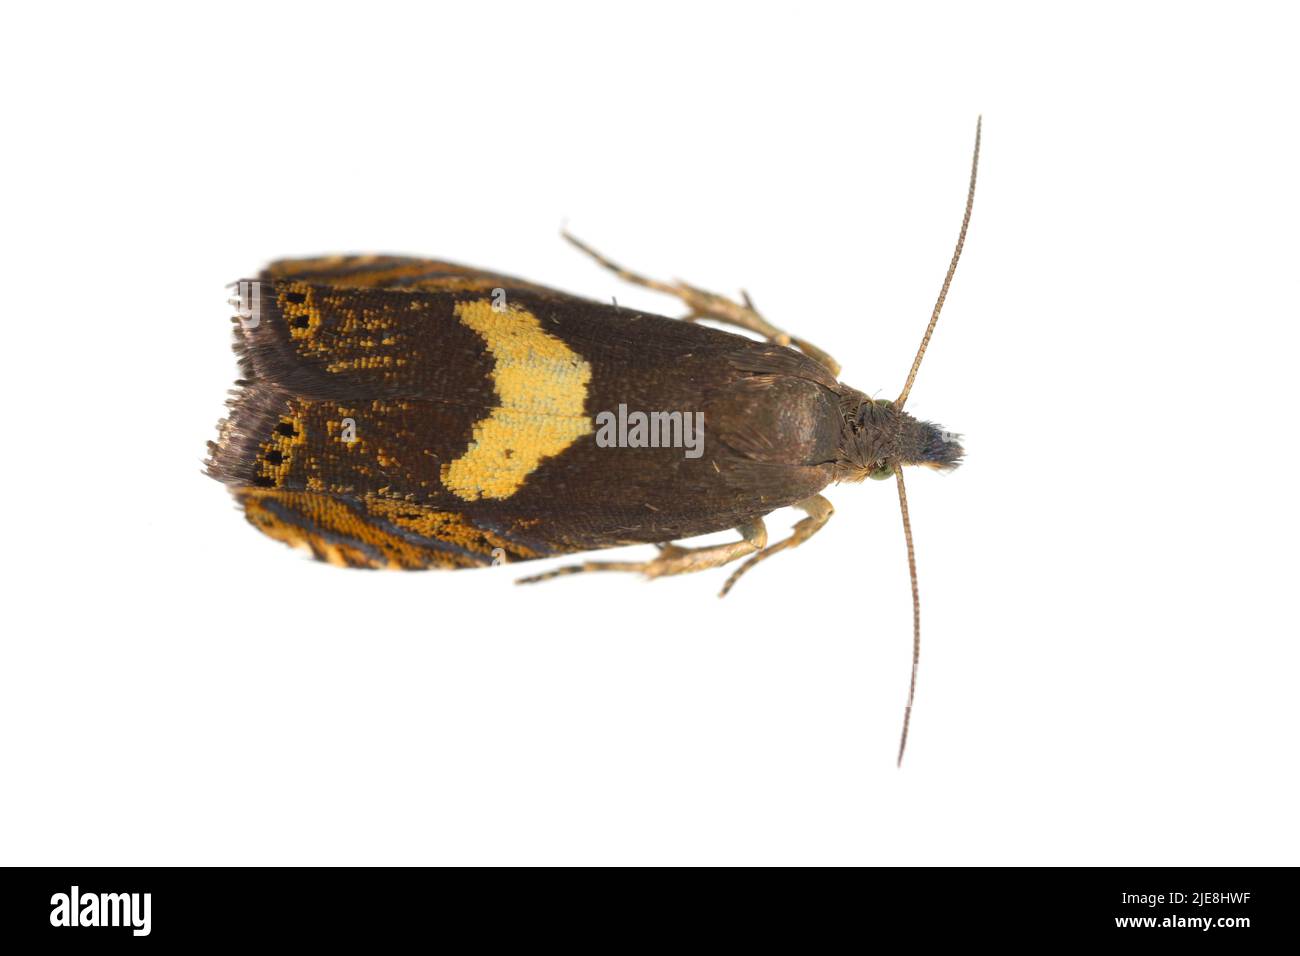 Adult Tortricid Leafroller Moth of the Family Tortricidae. Isolated on a white background. Stock Photo